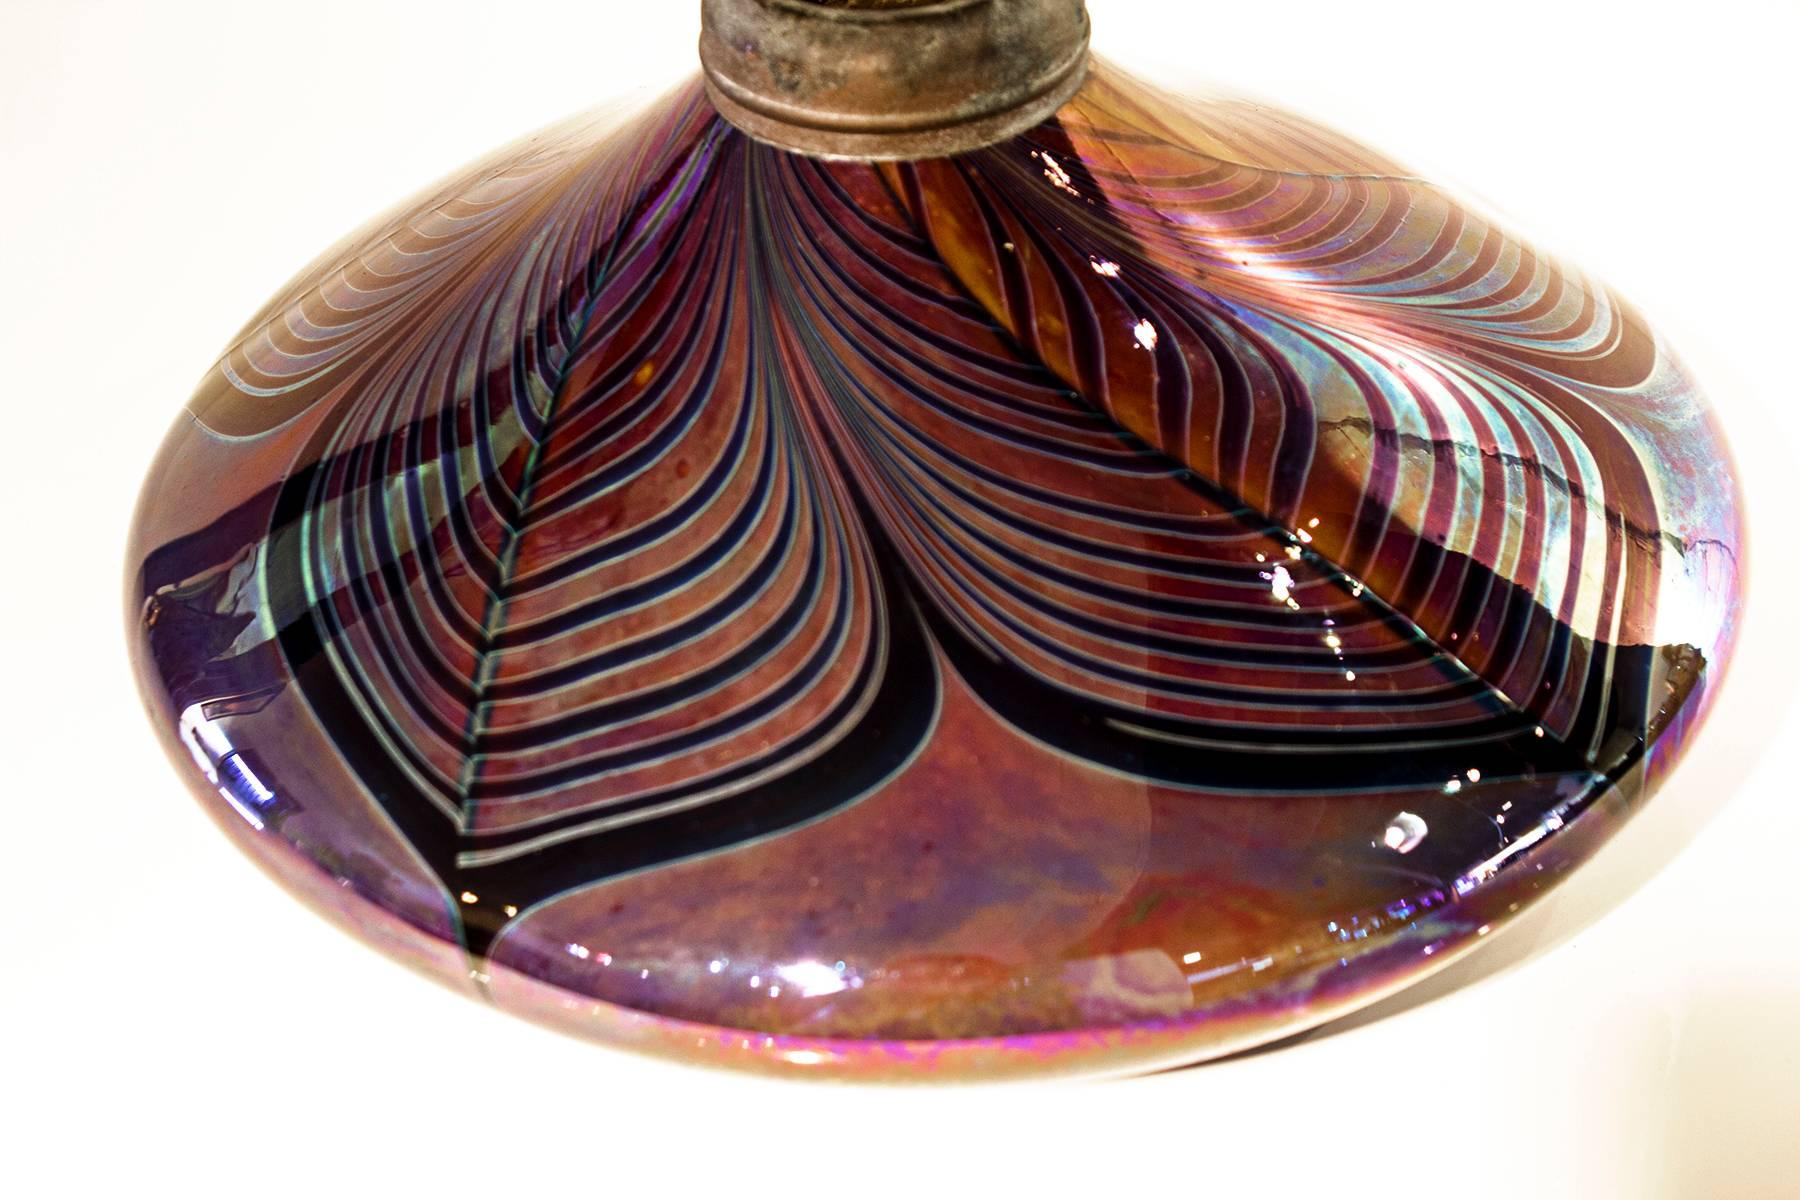 Pulled feather art glass oil lamp, with missing chimney. Highly resembles orient and flume glass. Clearly signed by David Hartman of Swallowtail in California, 1978.

Measures: 8" diameter x 4.5" height.